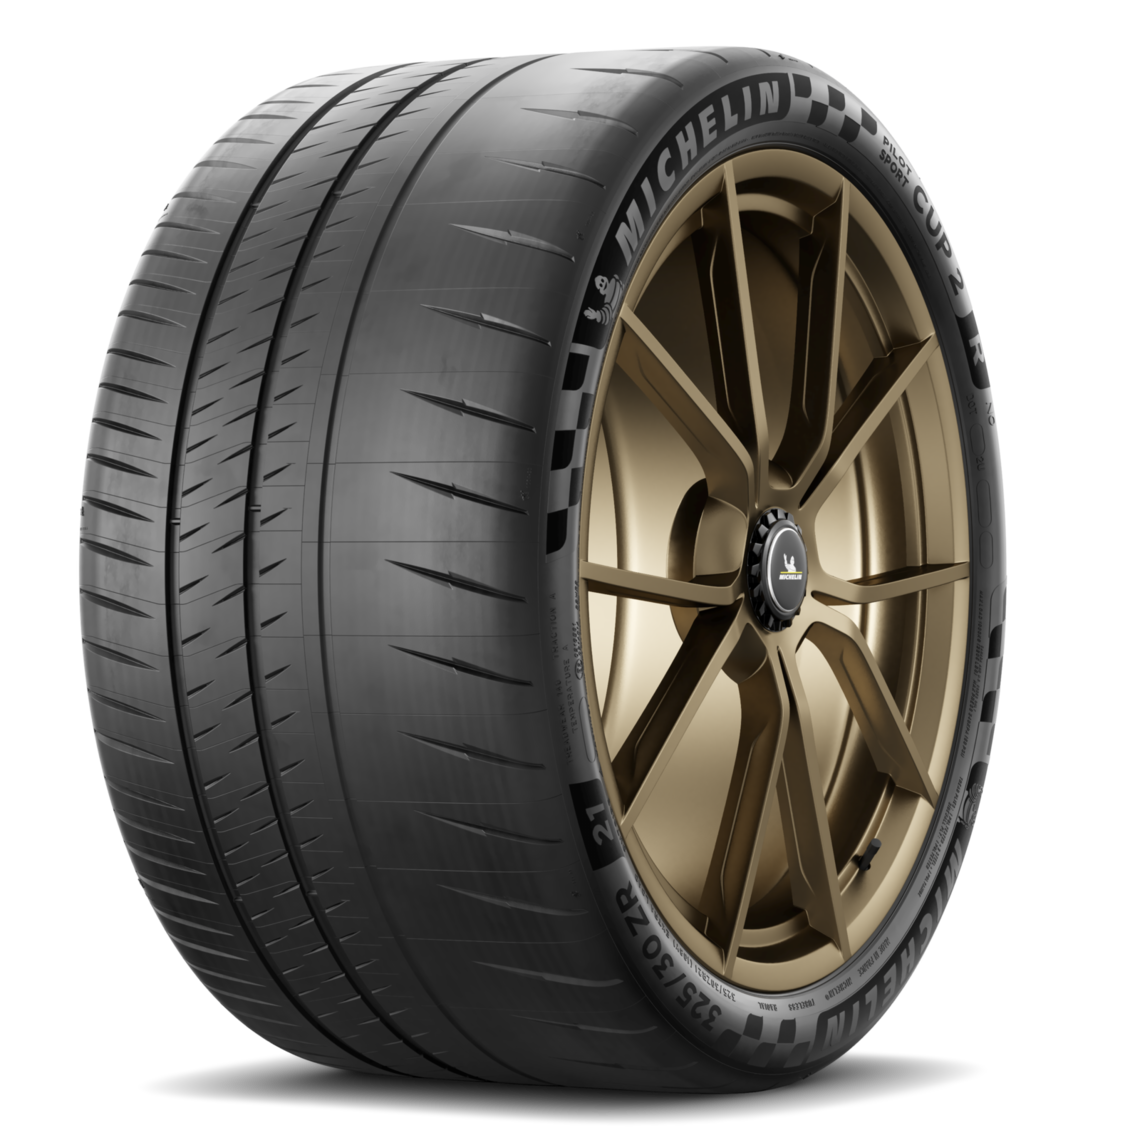 Michelin Pilot Sport Cup R Tyre Reviews and Tests